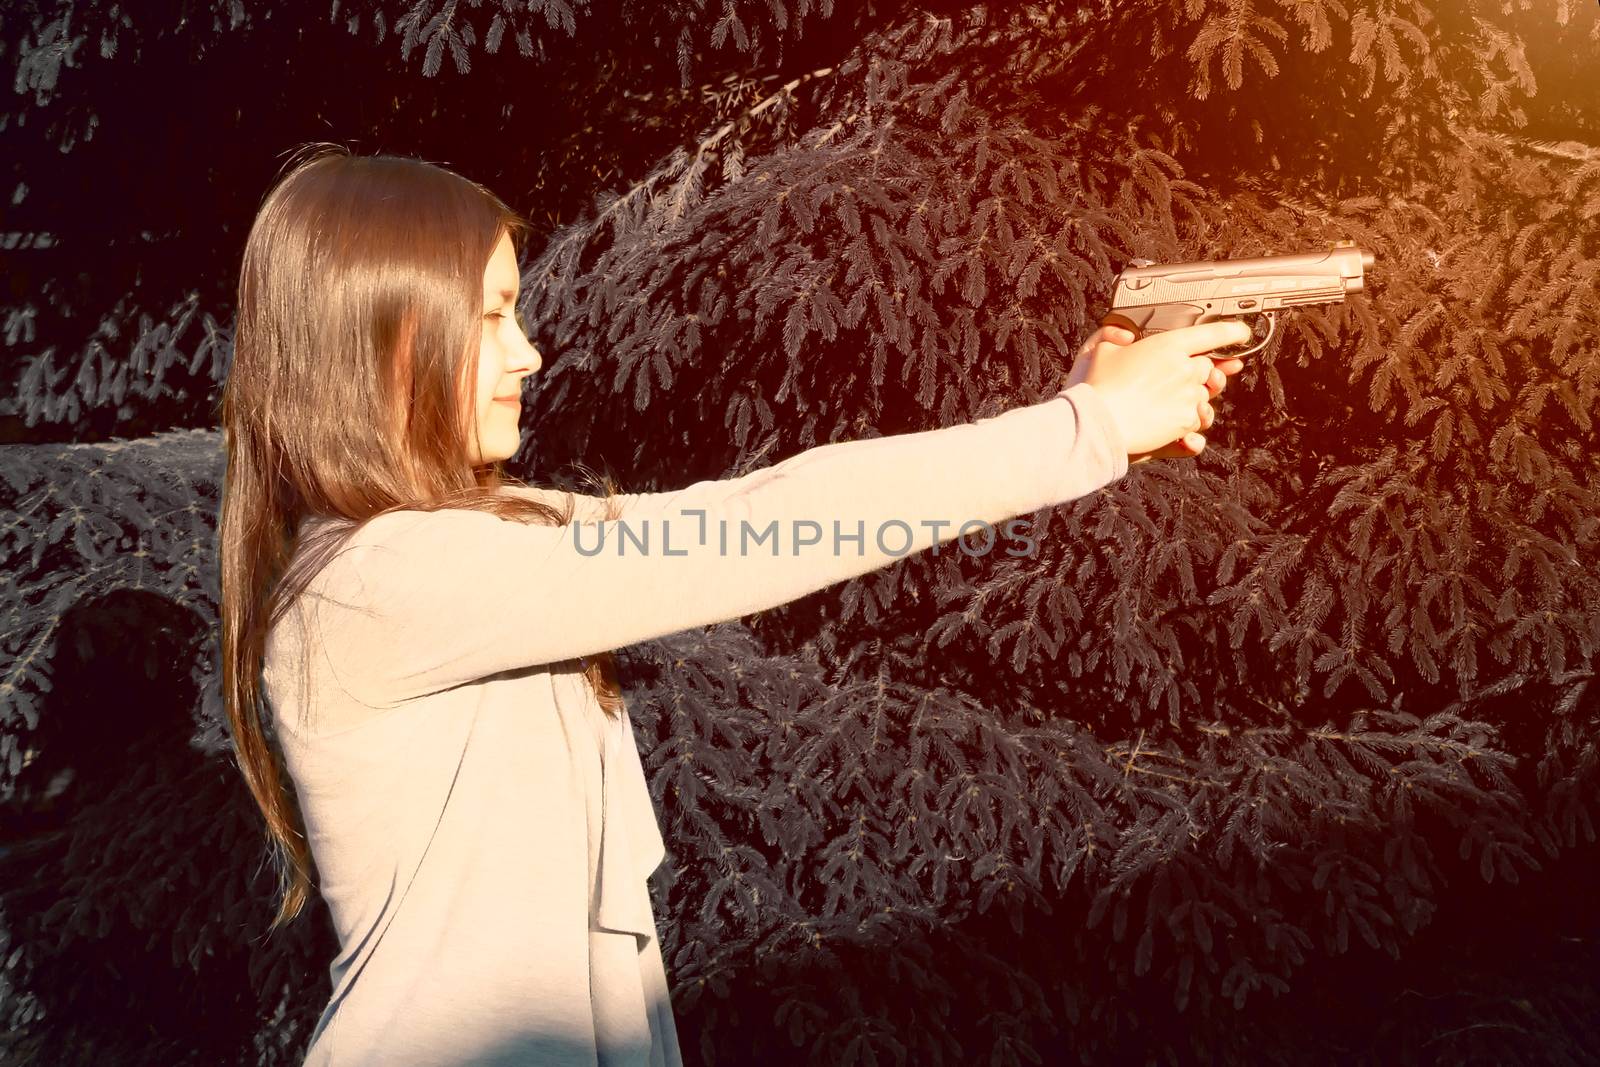 Pretty young Girl aiming from a pneumatic gun, outdoors.